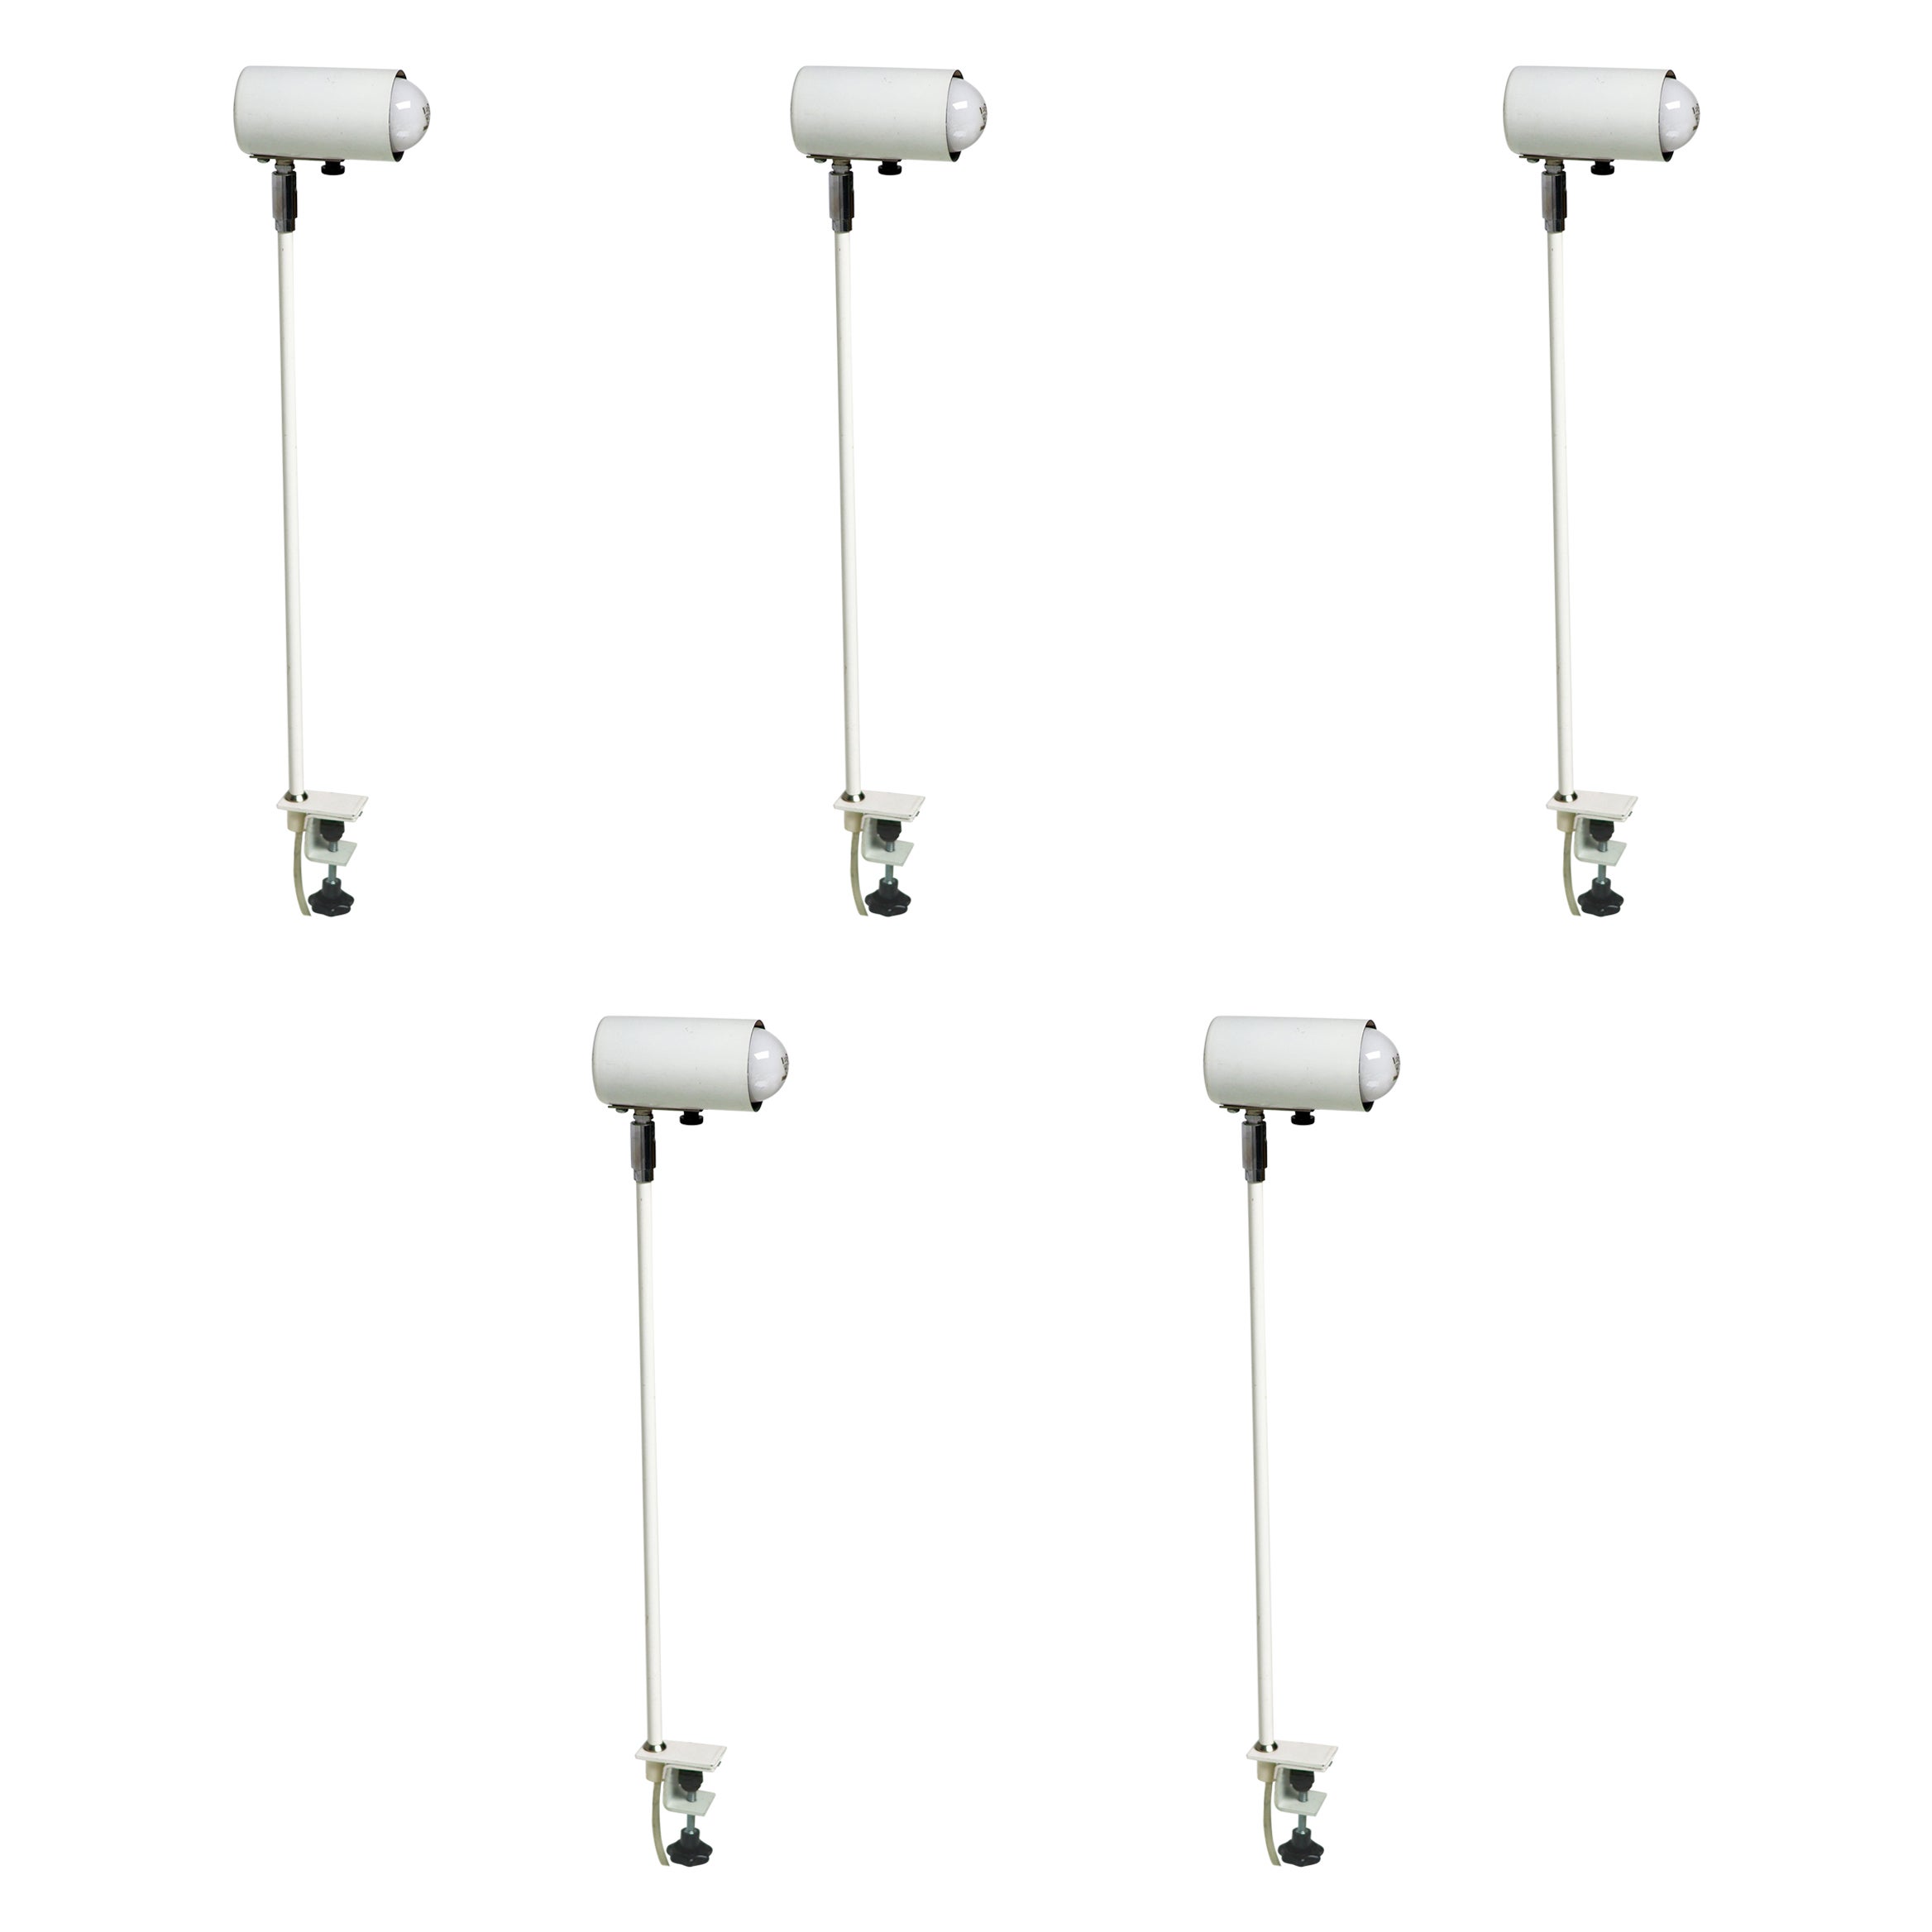 Set of Five Clamp Lamps by SIS Germany 